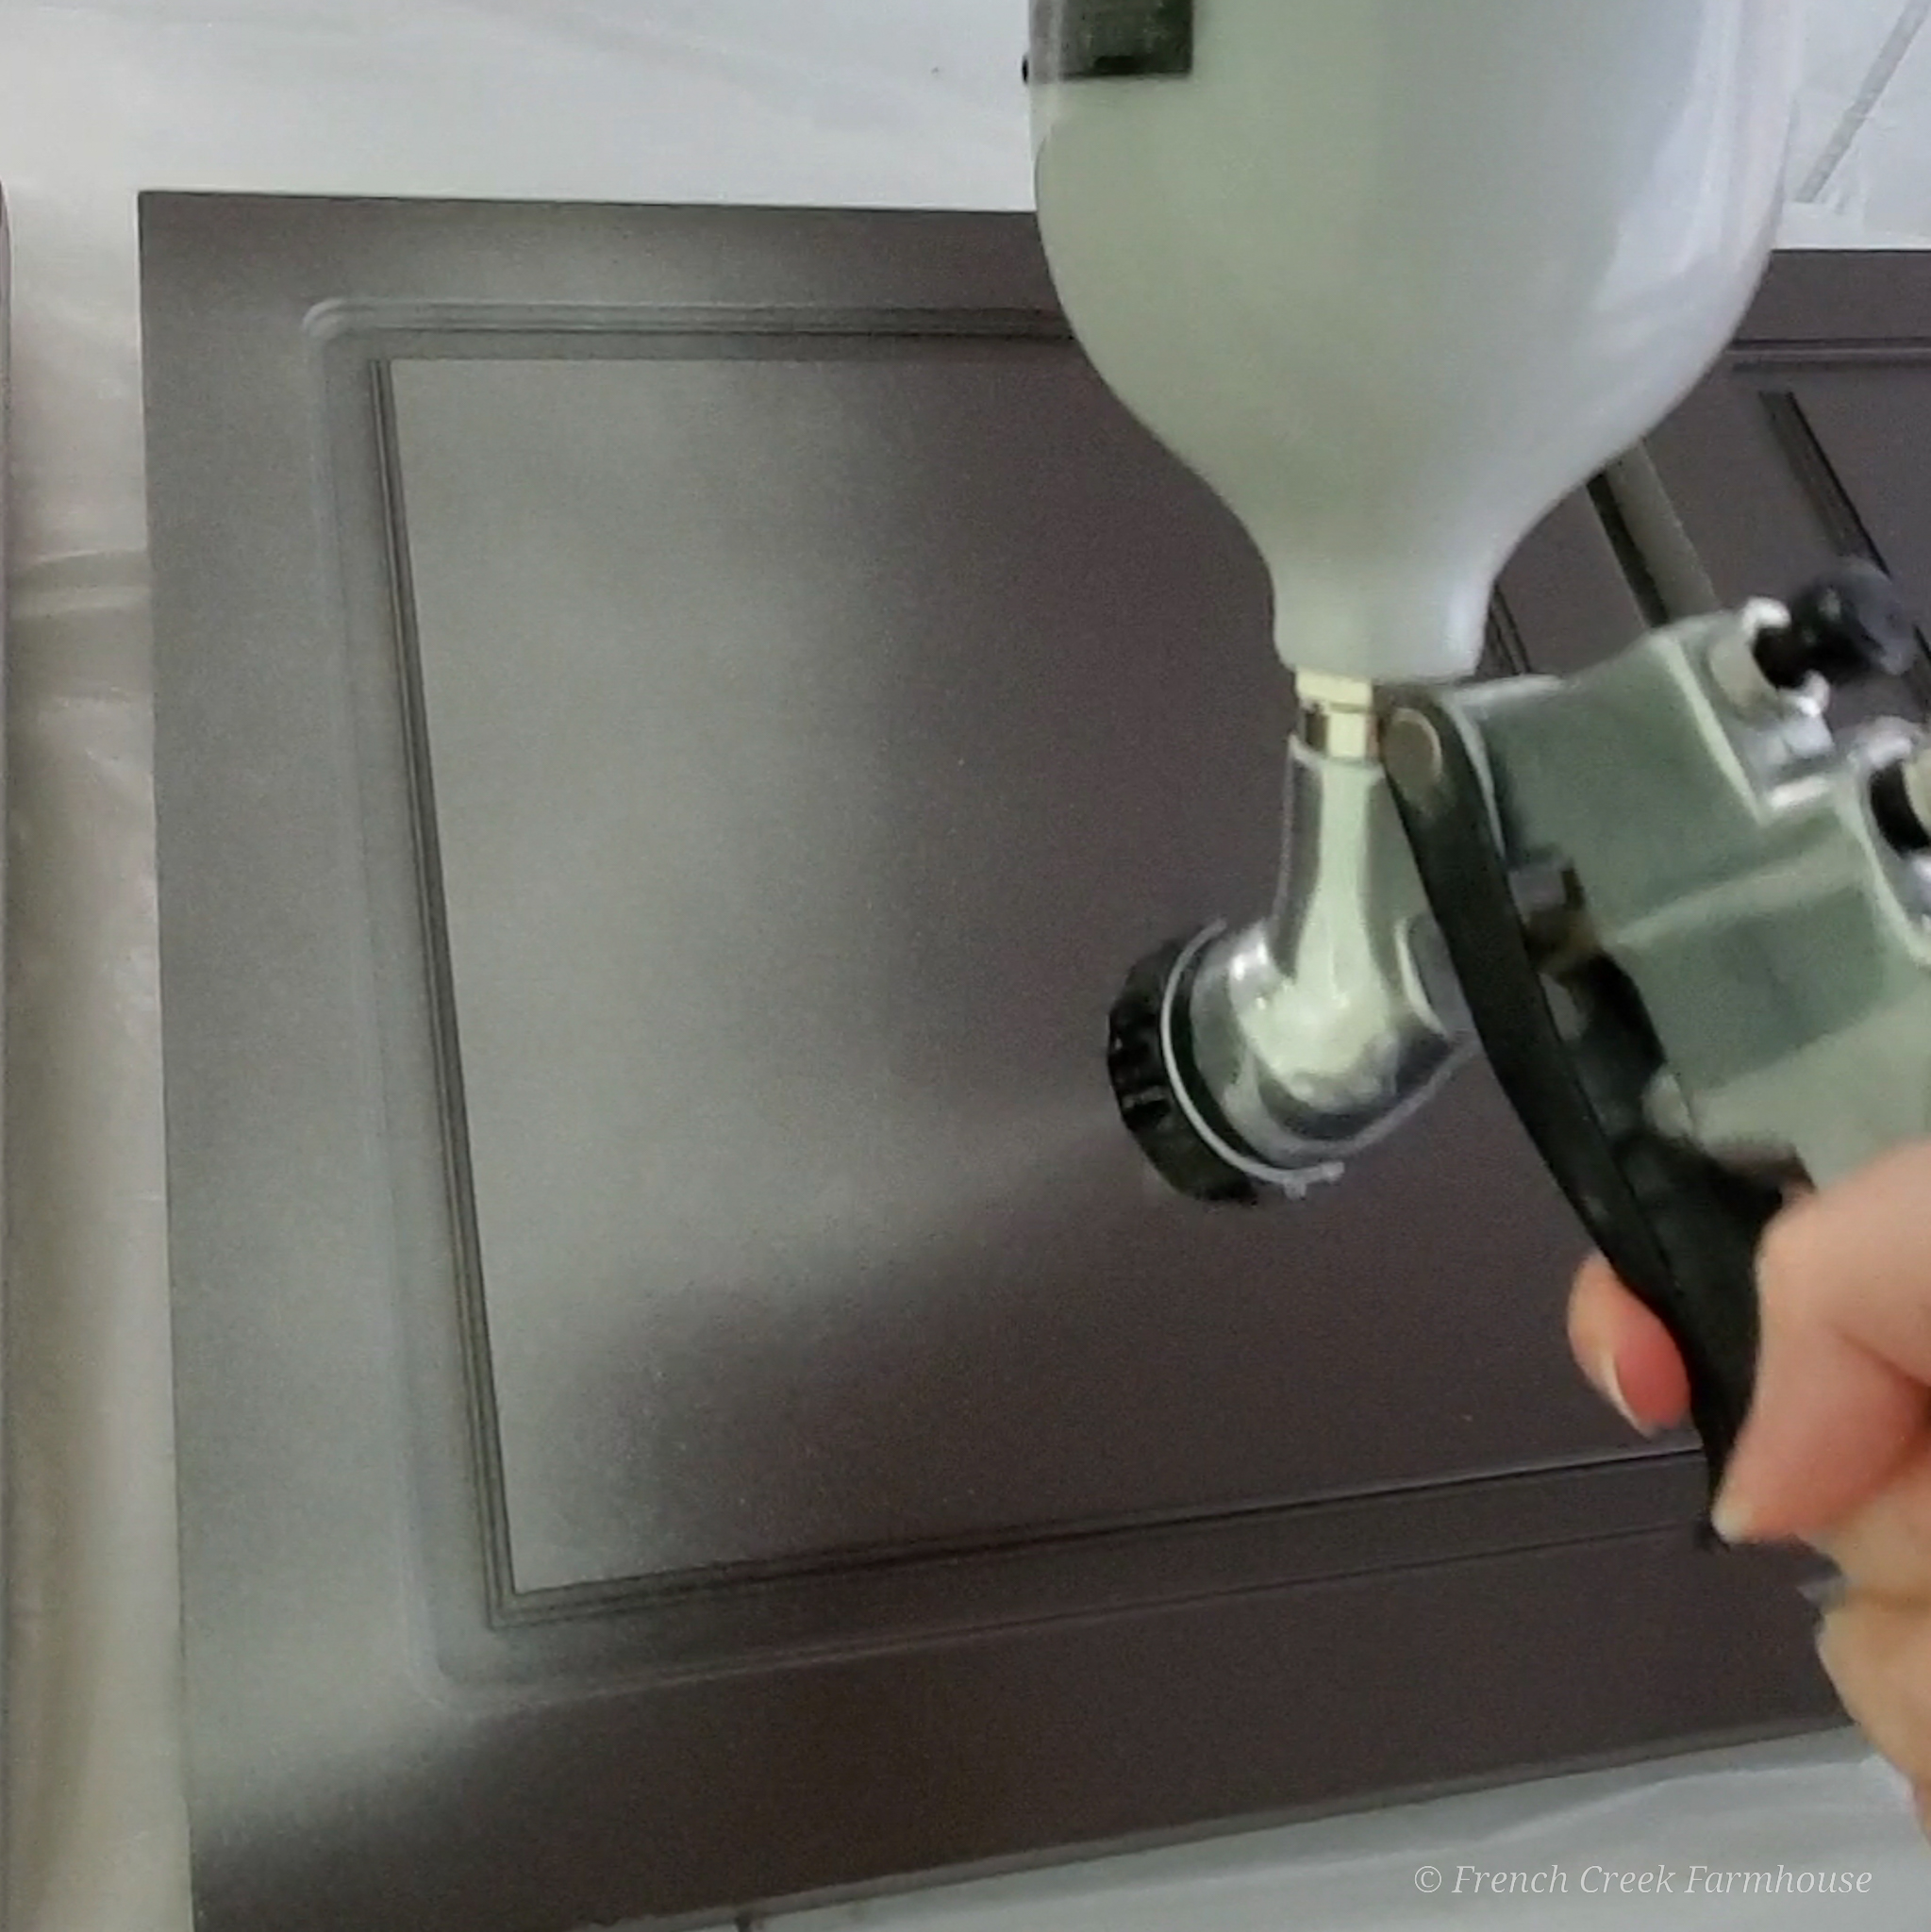 Using an HVLP gravity fed spray gun makes a smooth and professional finish